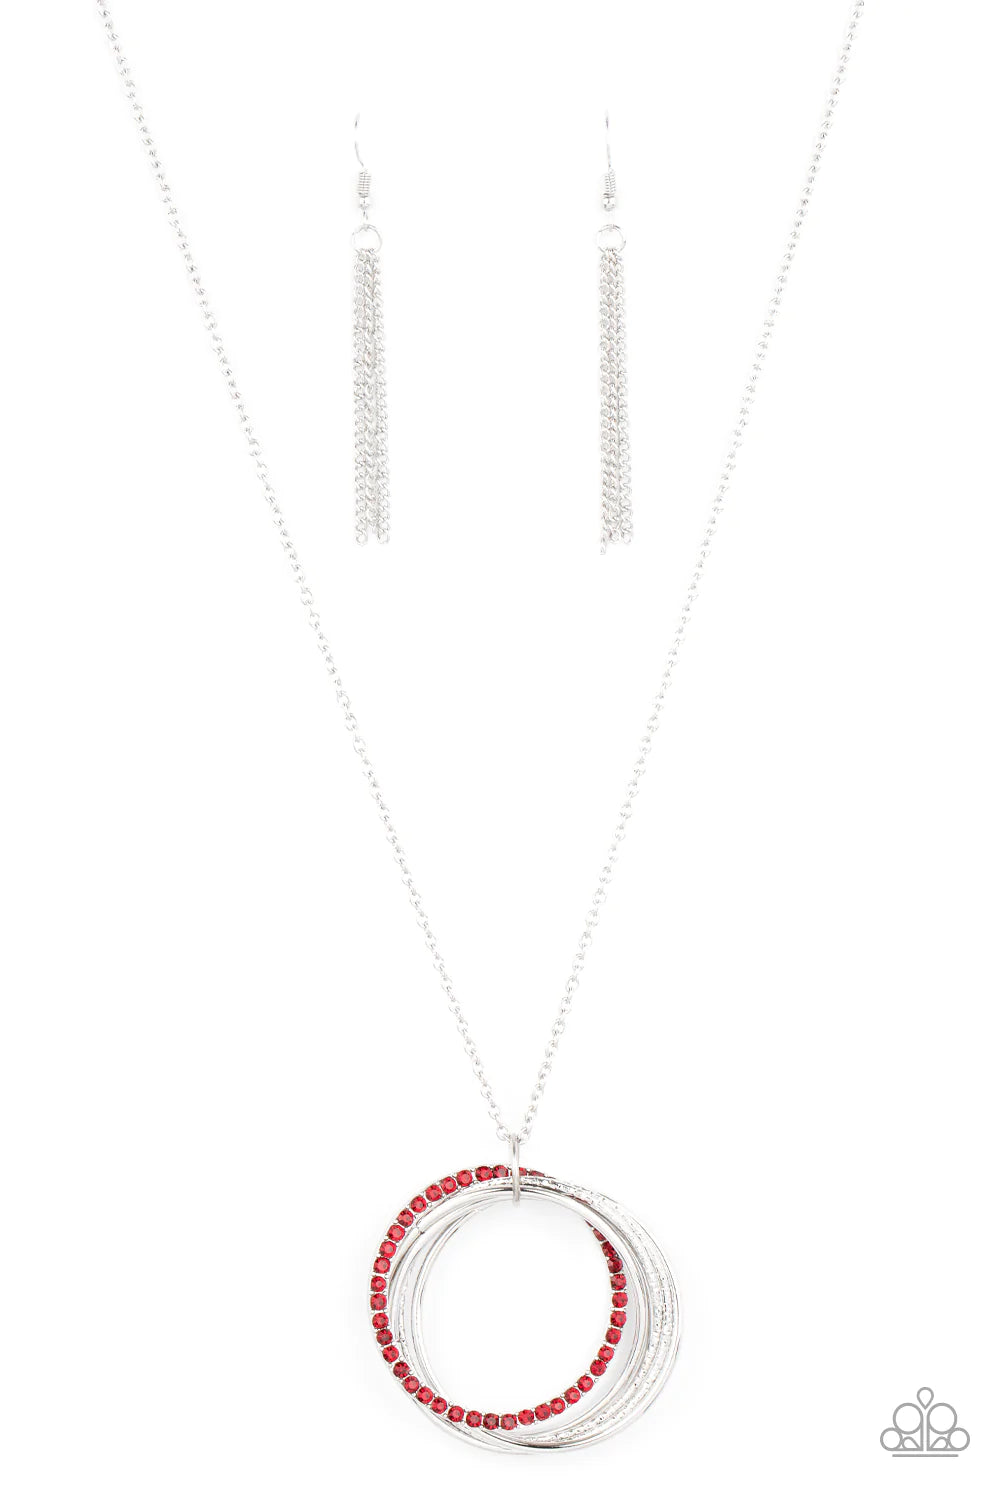 Harmonic Halos - Red Necklace - Paparazzi Accessories - Alies Bling Bar